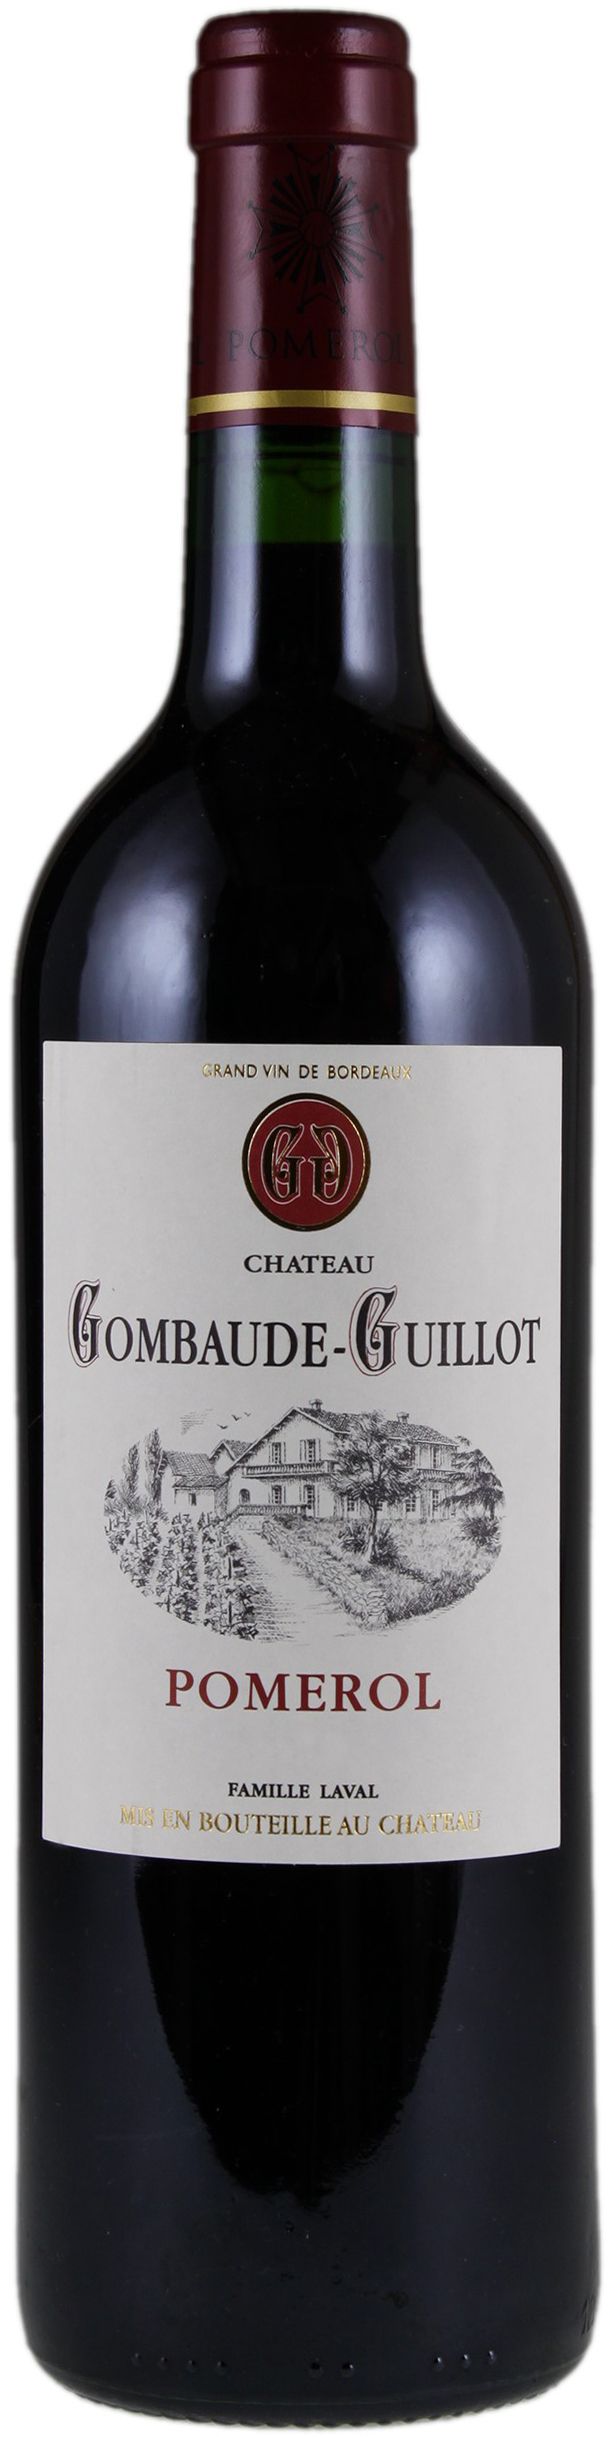 Chateau Gombaude Guillot, 2009